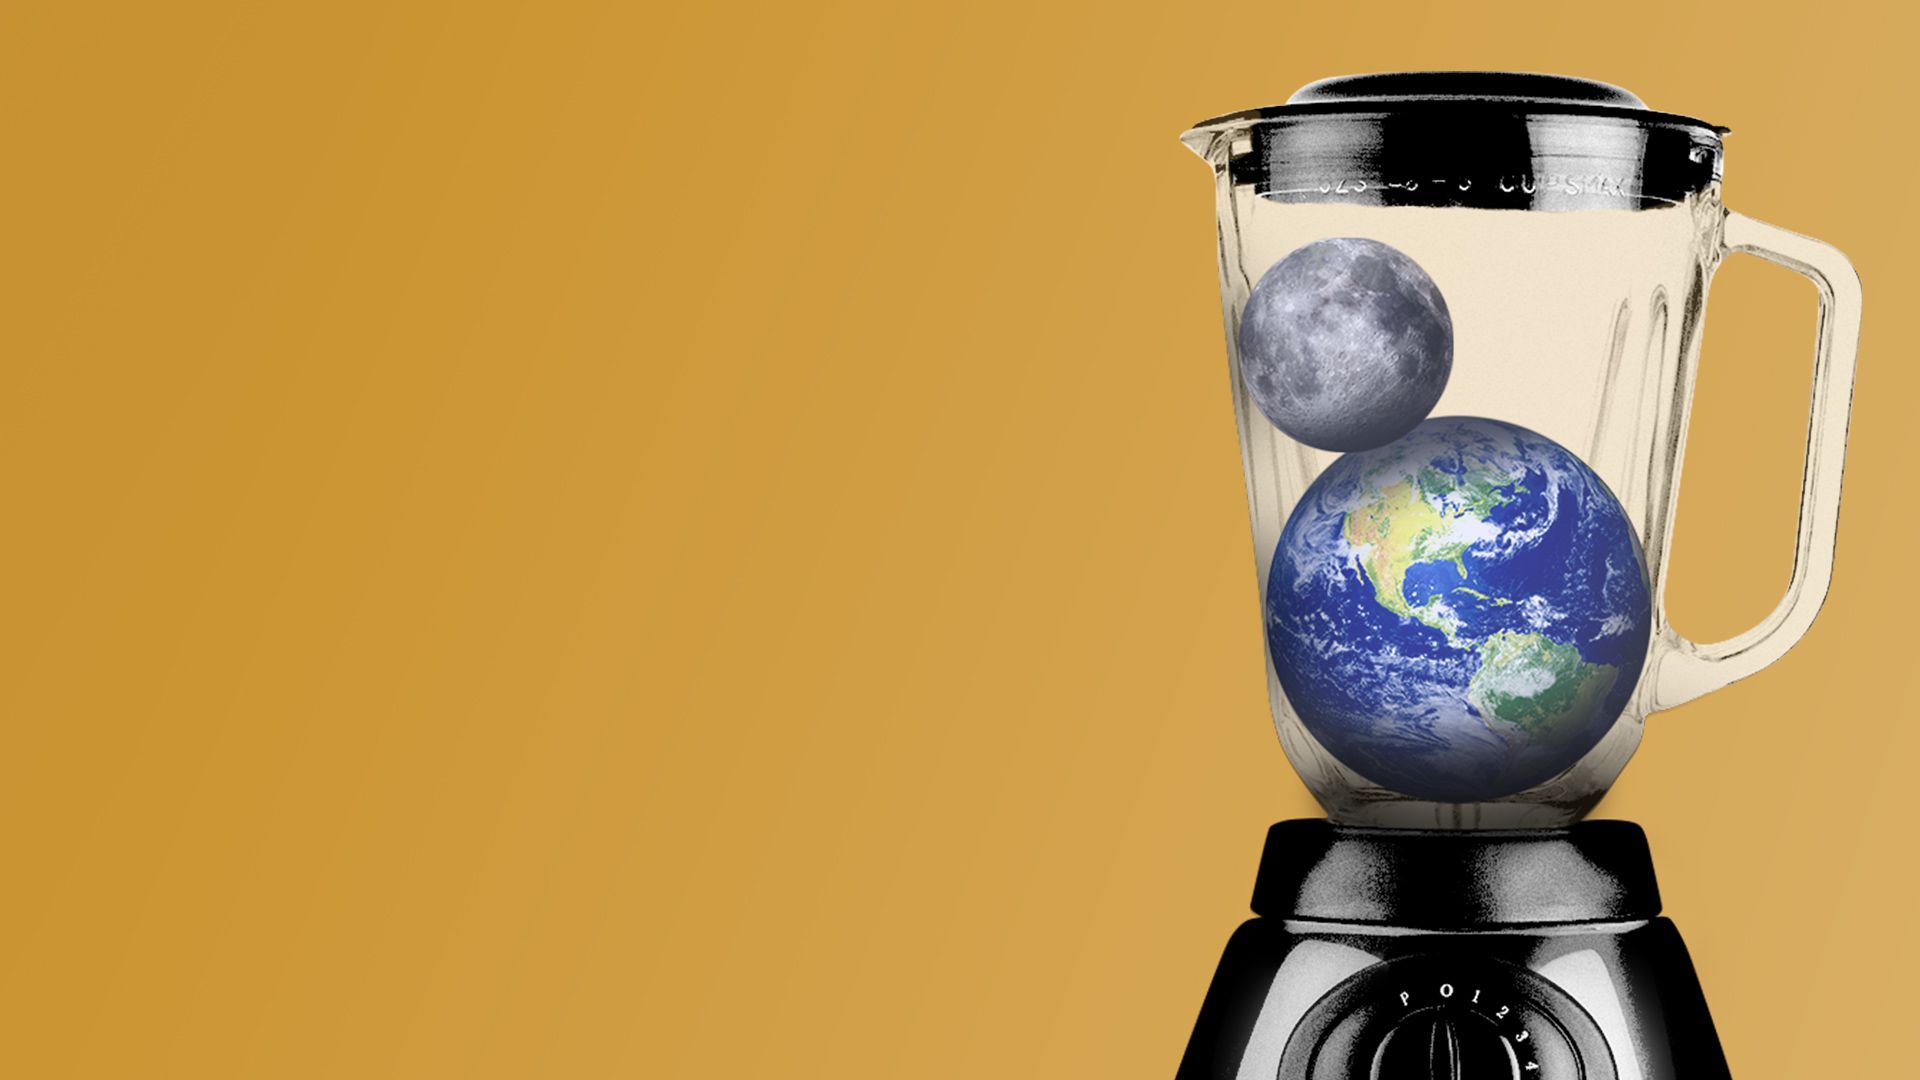 Illustration of a blender with the Earth and the Moon inside.